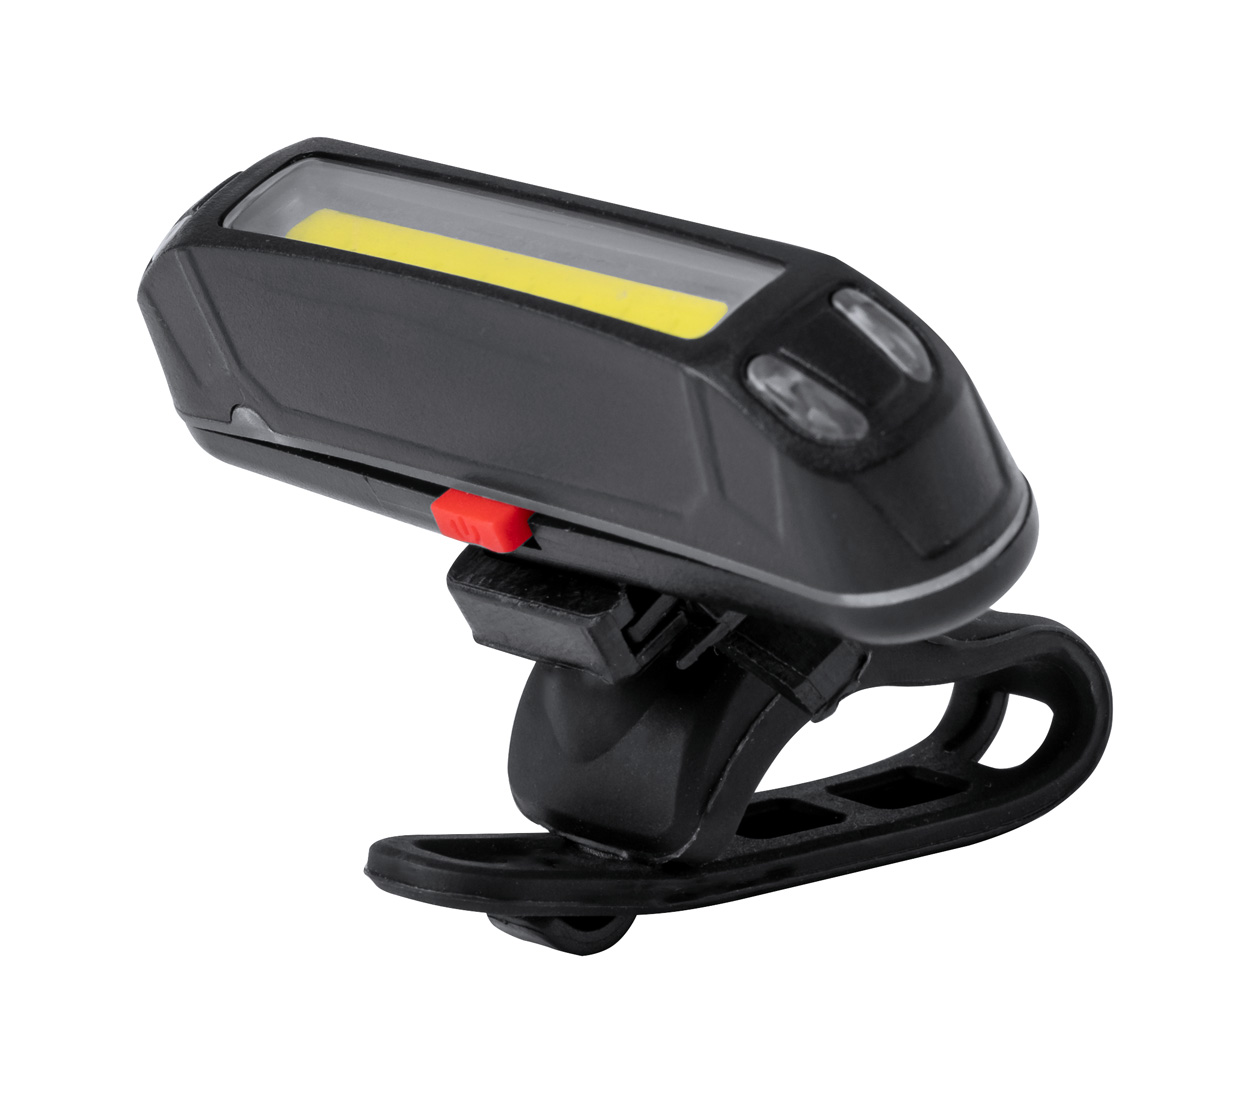 Promo  Havu rechargeable bicycle light